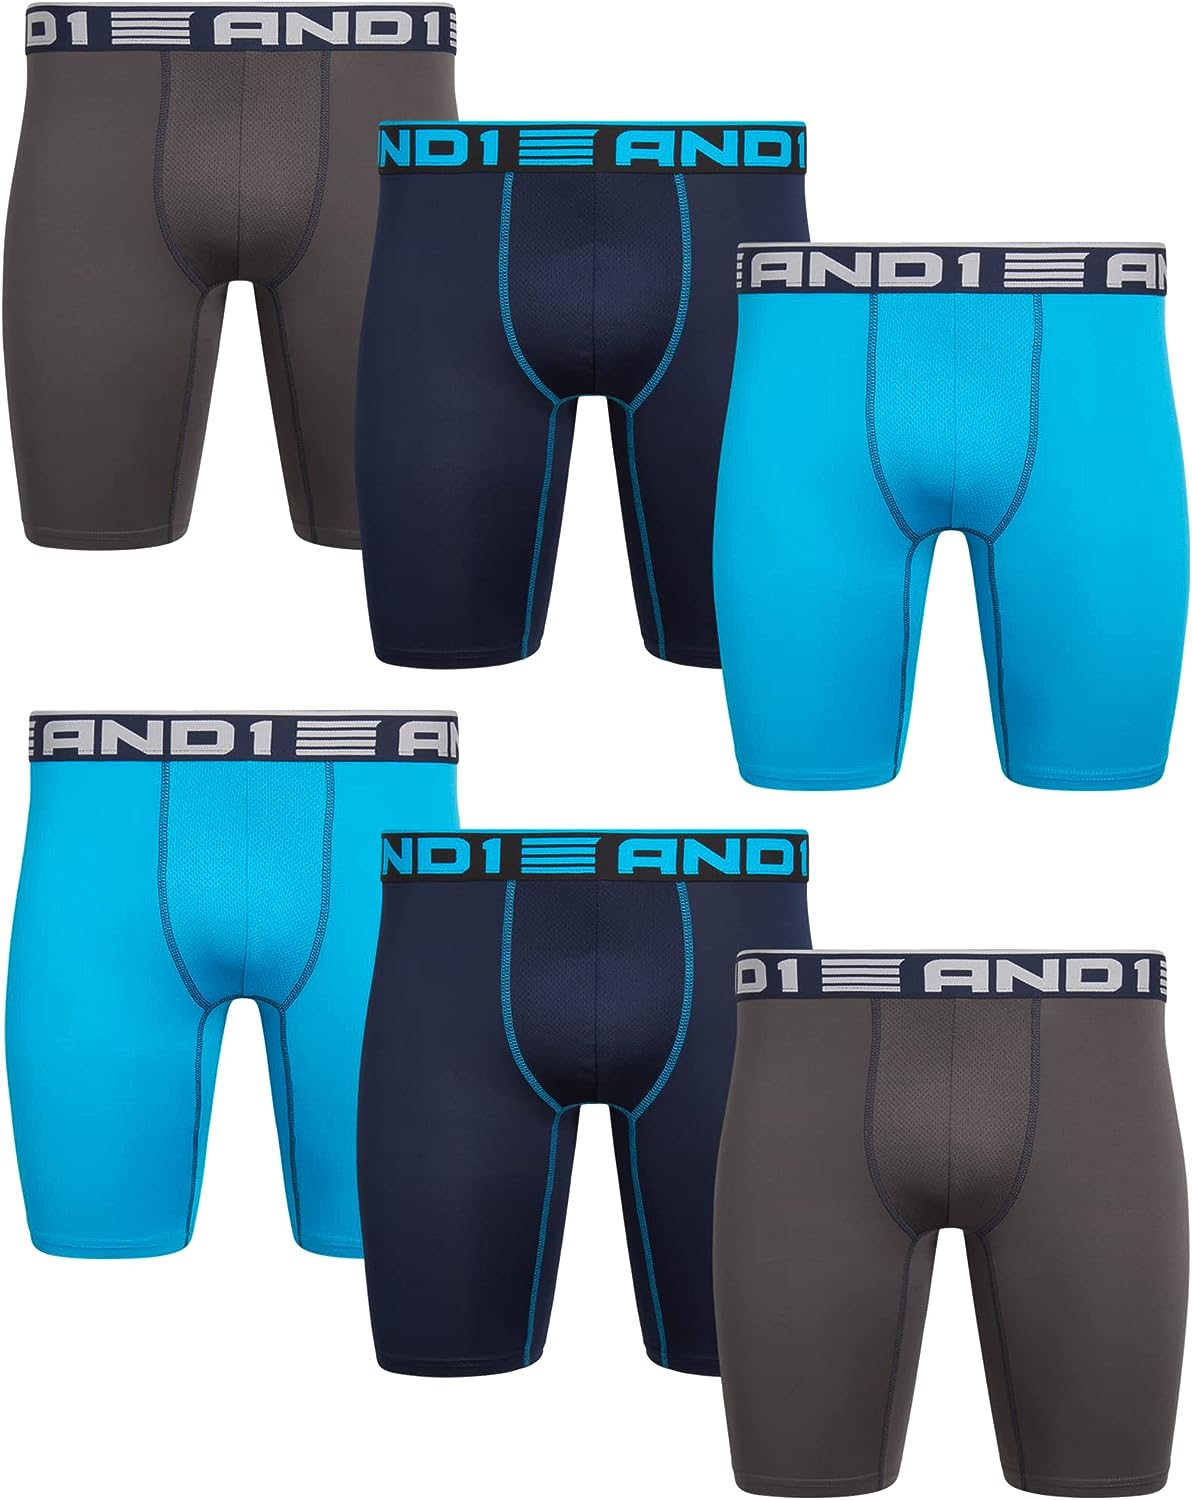 AND1 Men's Underwear 6 Pack Long Leg Performance Compression Boxer